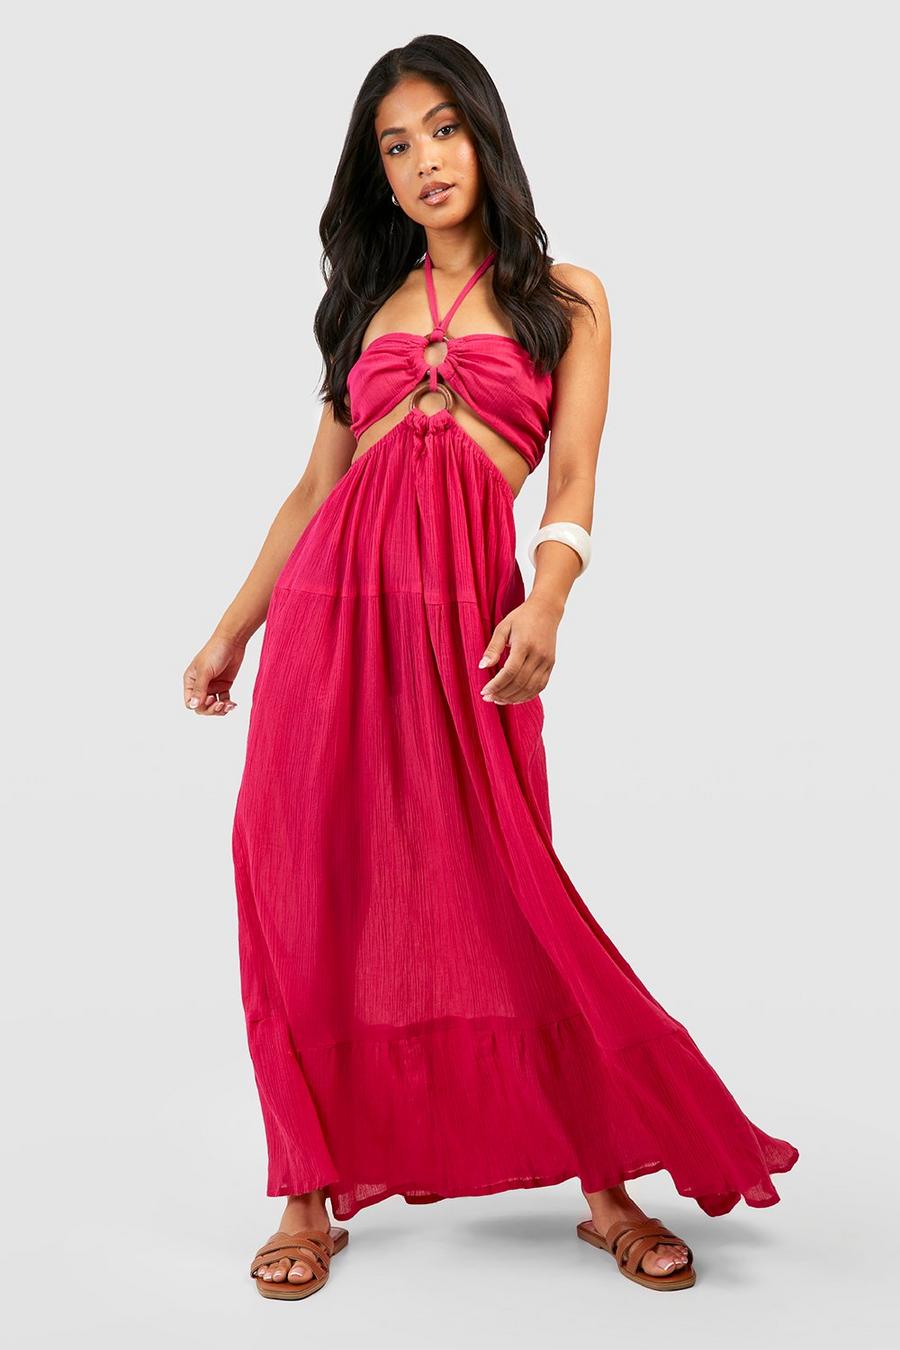 Hot pink Petite Halter Ring Detail Cheesecloth Beach Maxi Dress